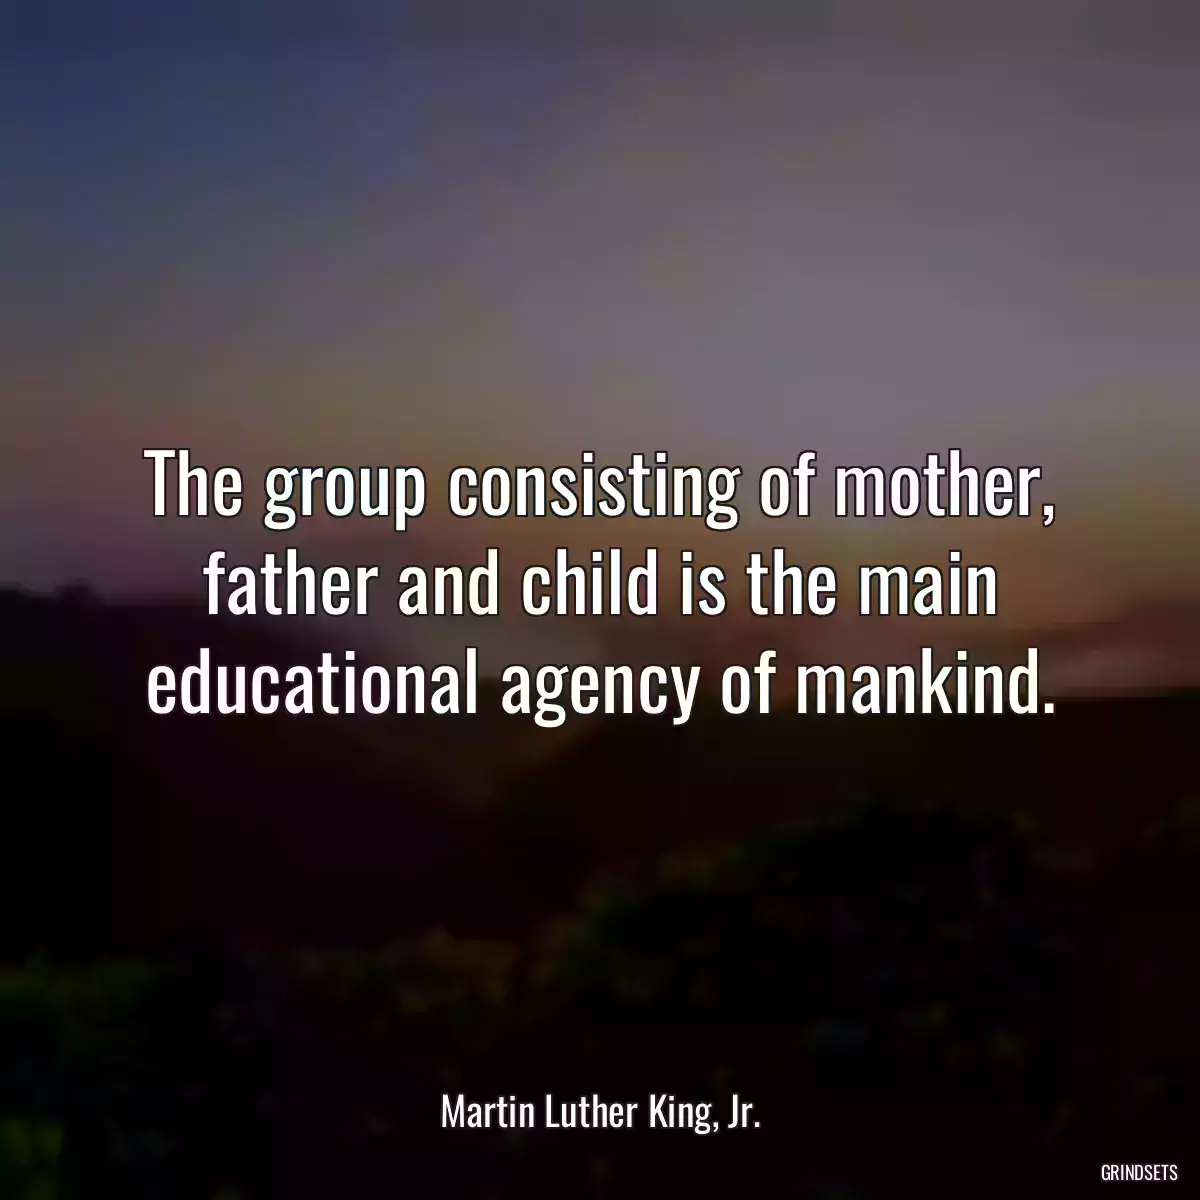 The group consisting of mother, father and child is the main educational agency of mankind.